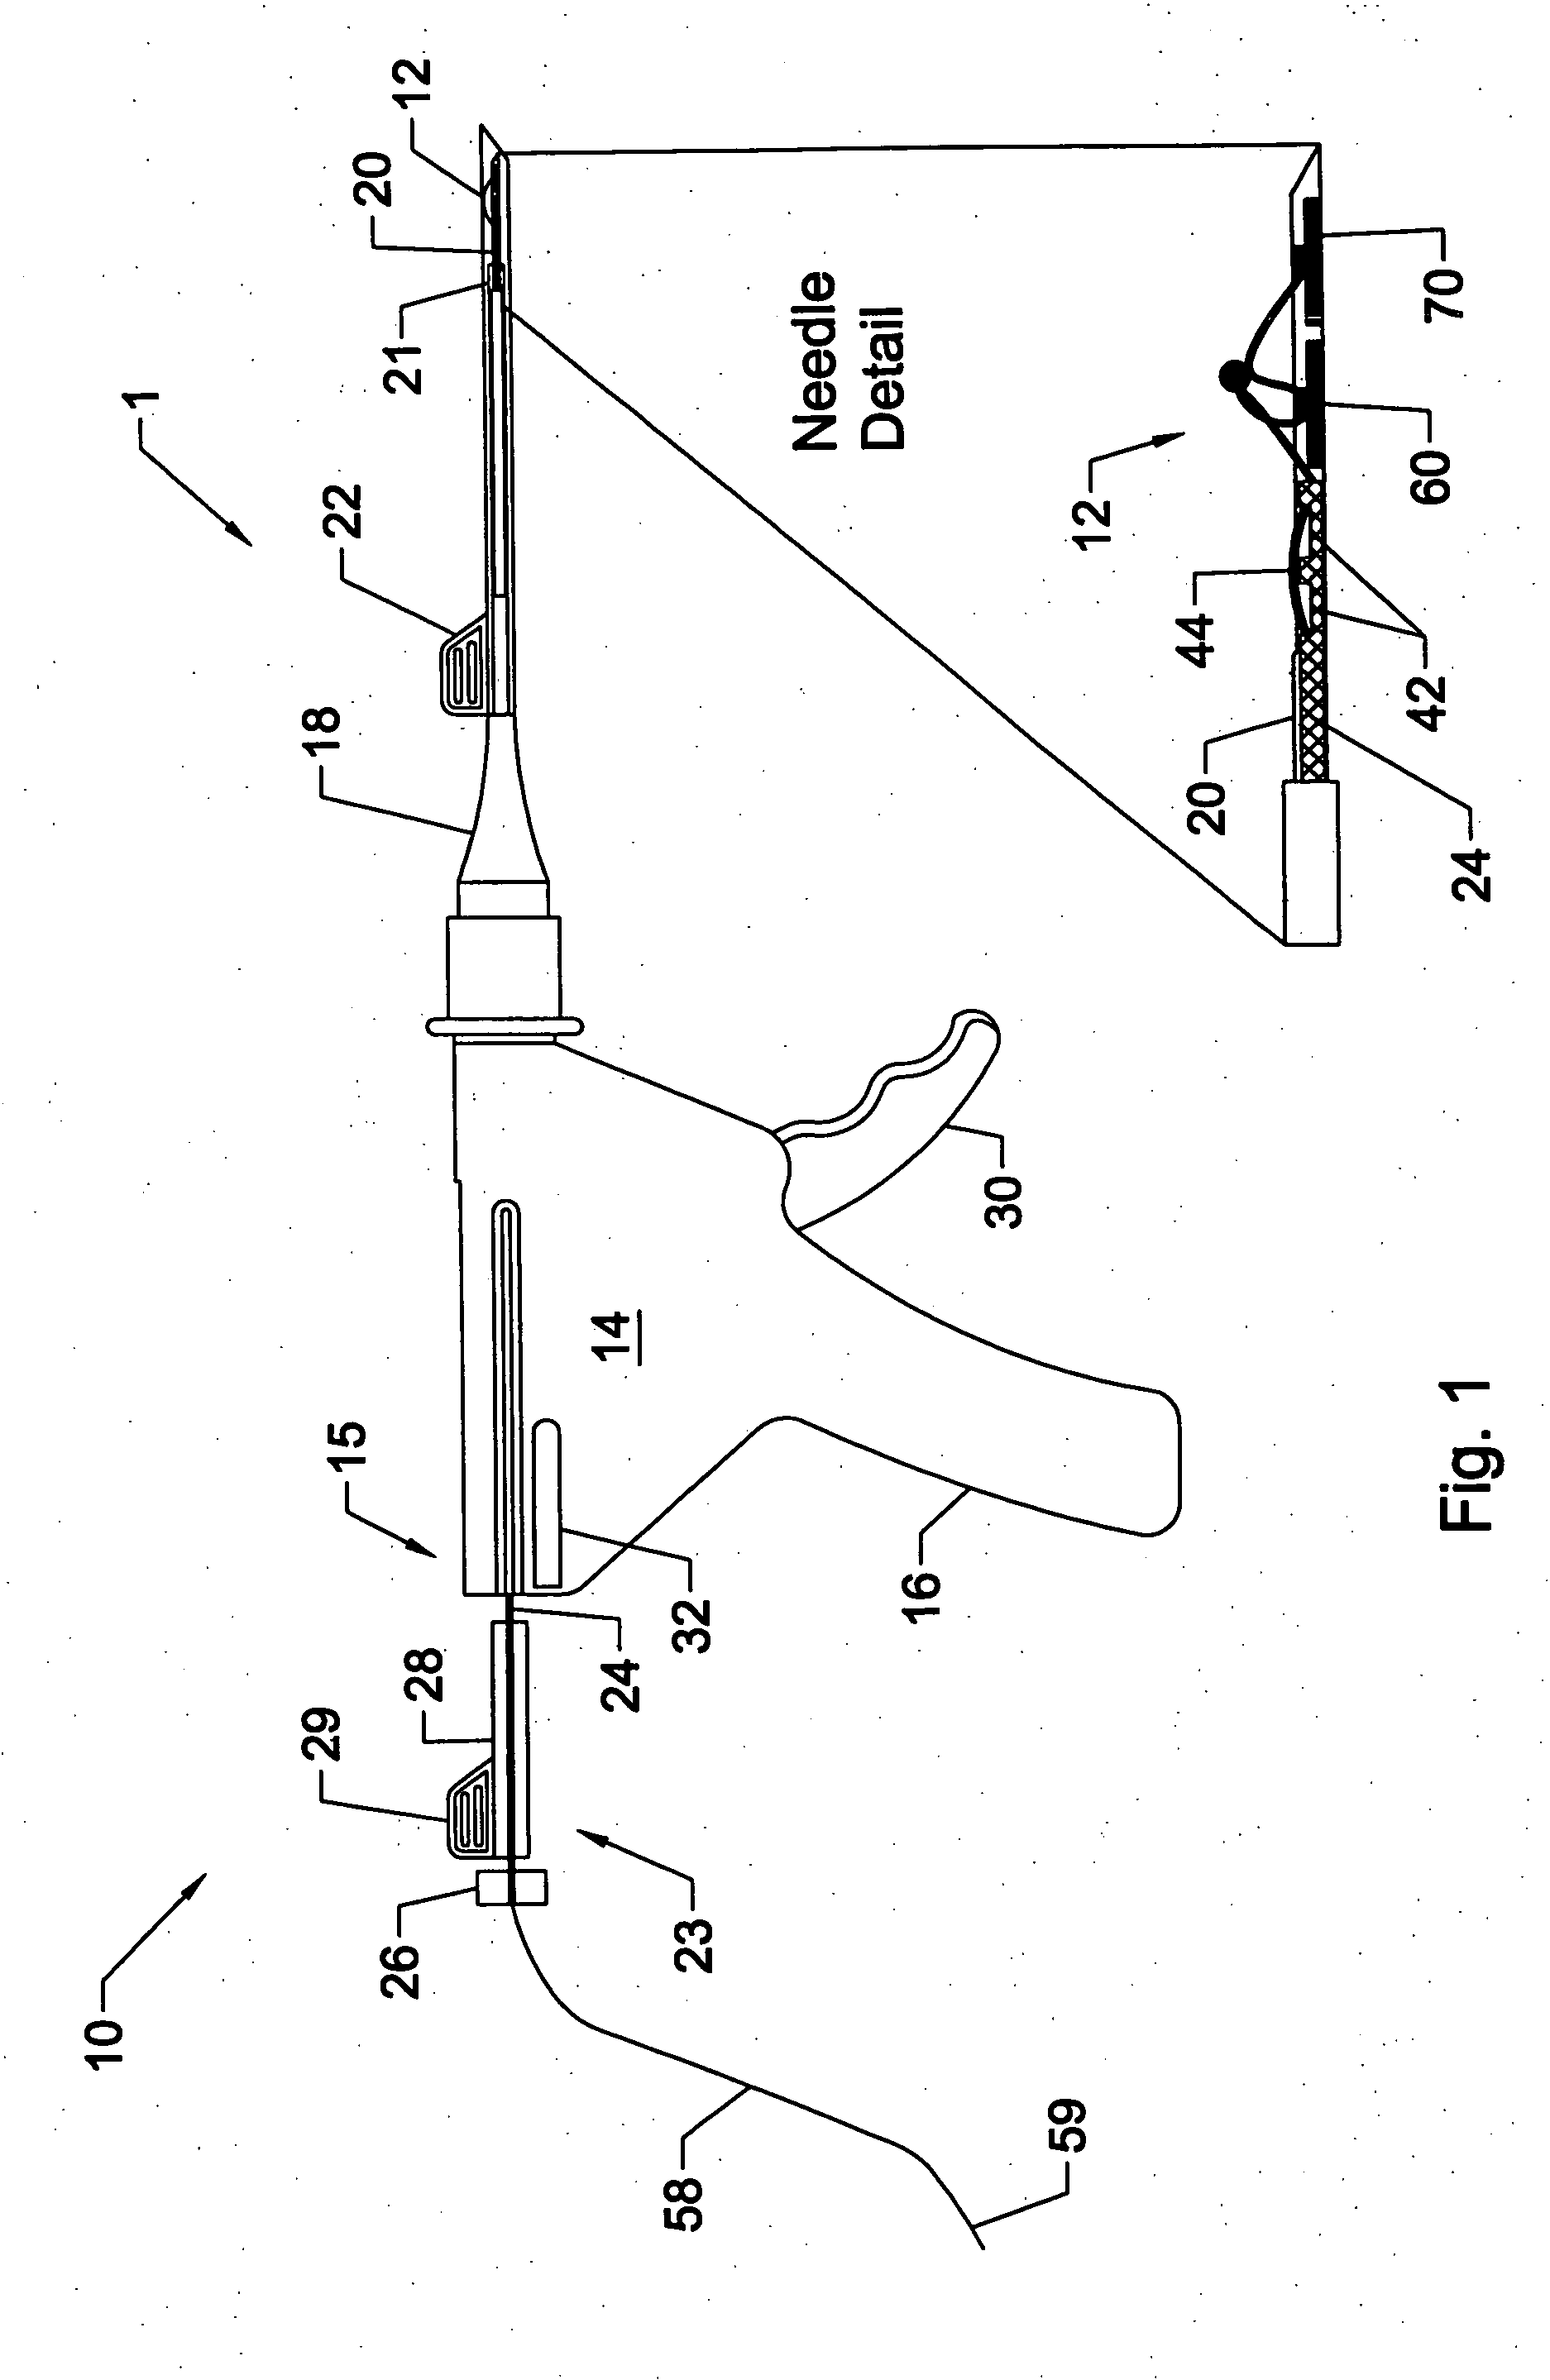 System and method for all-inside suture fixation for implant attachment and soft tissue repair